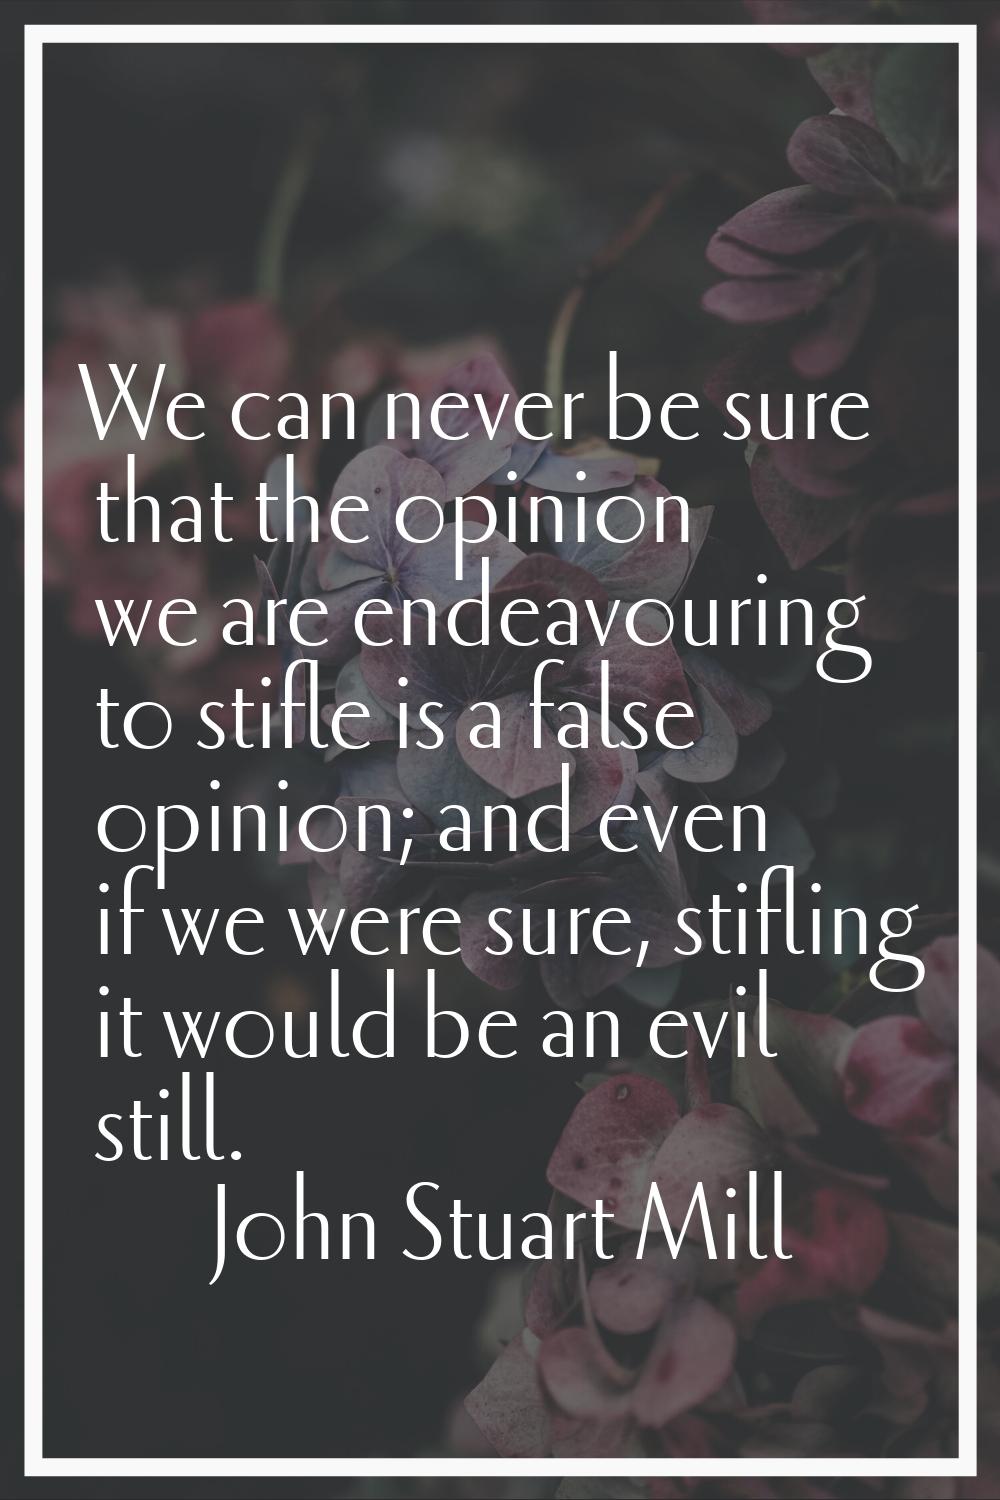 We can never be sure that the opinion we are endeavouring to stifle is a false opinion; and even if